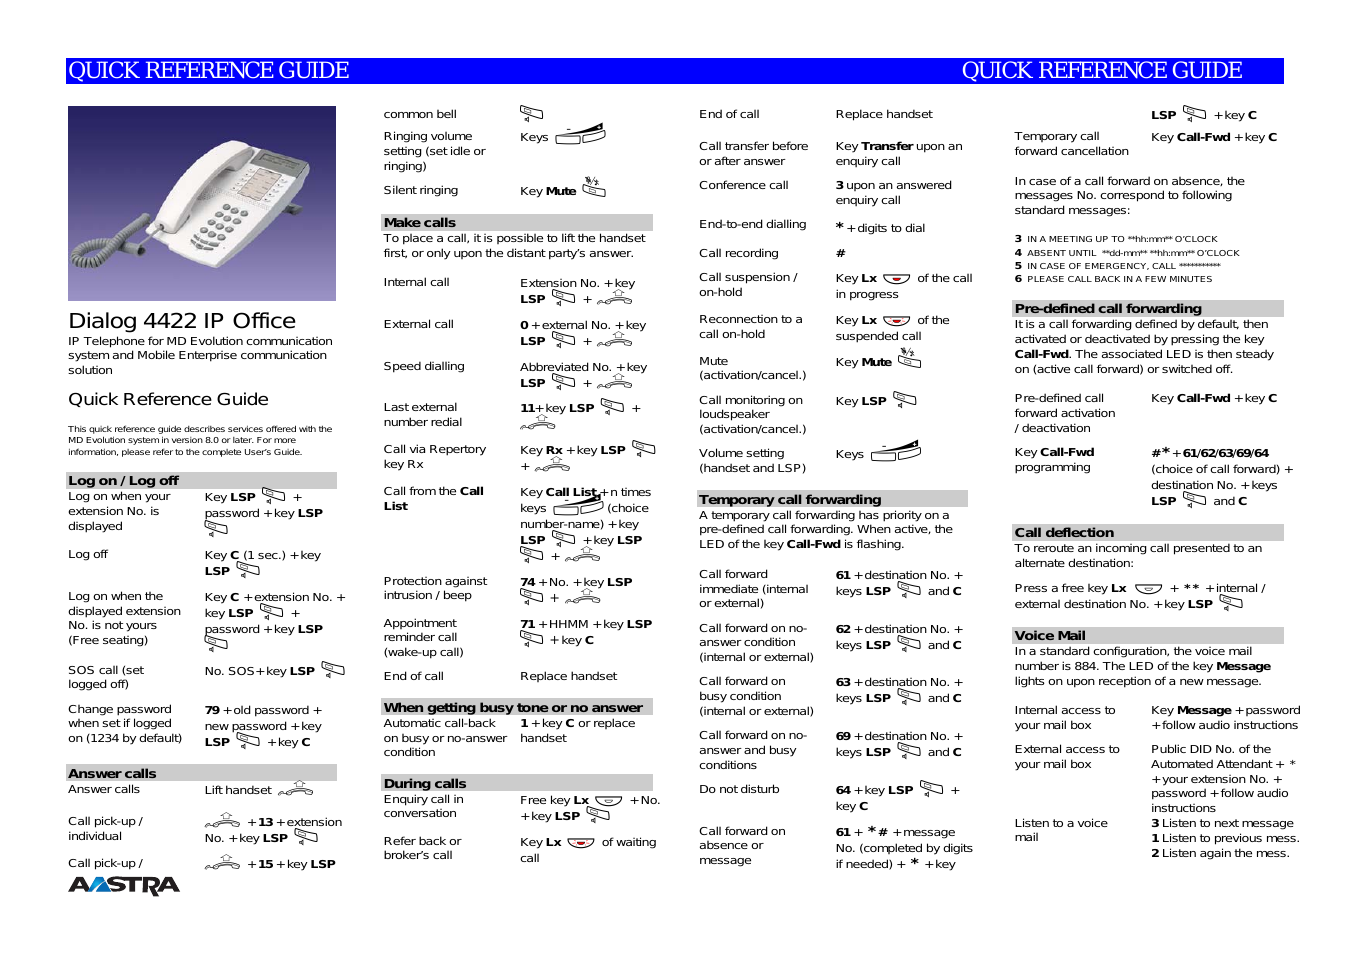 4422 IP Office for MD Evolution Quick Reference Guide